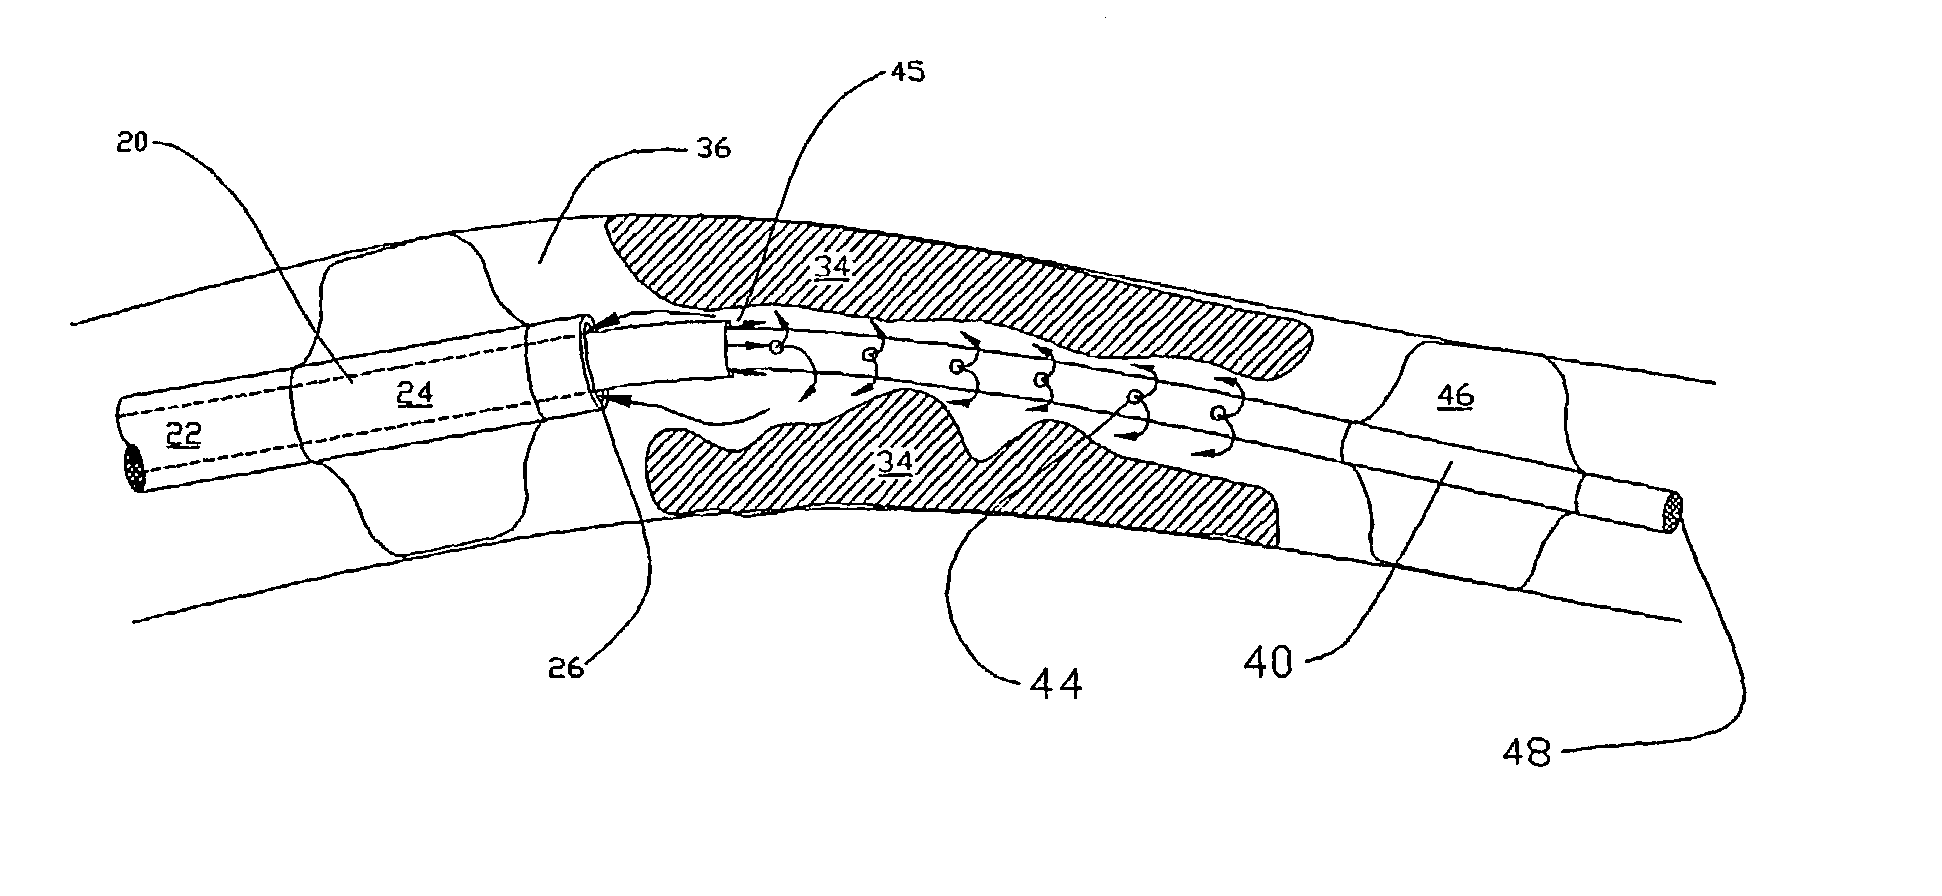 Methods for enhancing fluid flow through an obstructed vascular site, and systems and kits for use in practicing the same